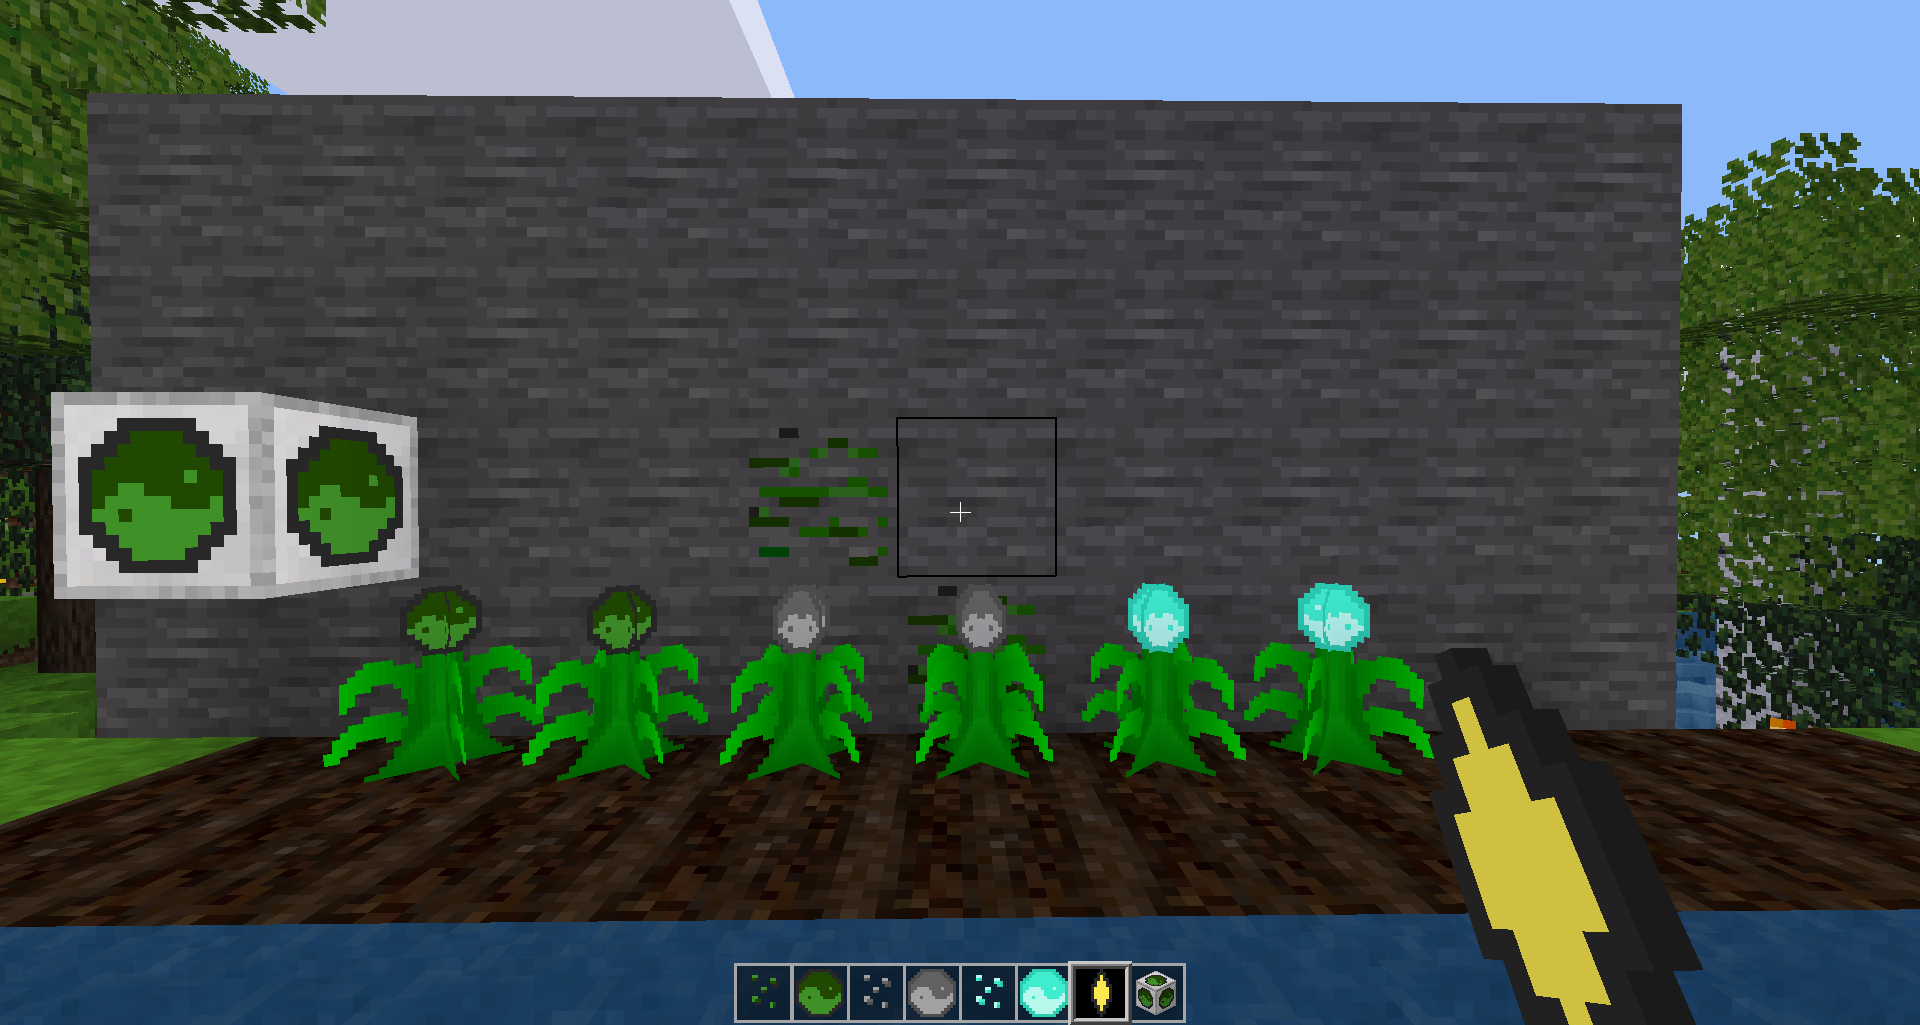 Crops and Essence Harvester, with seeds, essence, and infusion stone in hotbar.